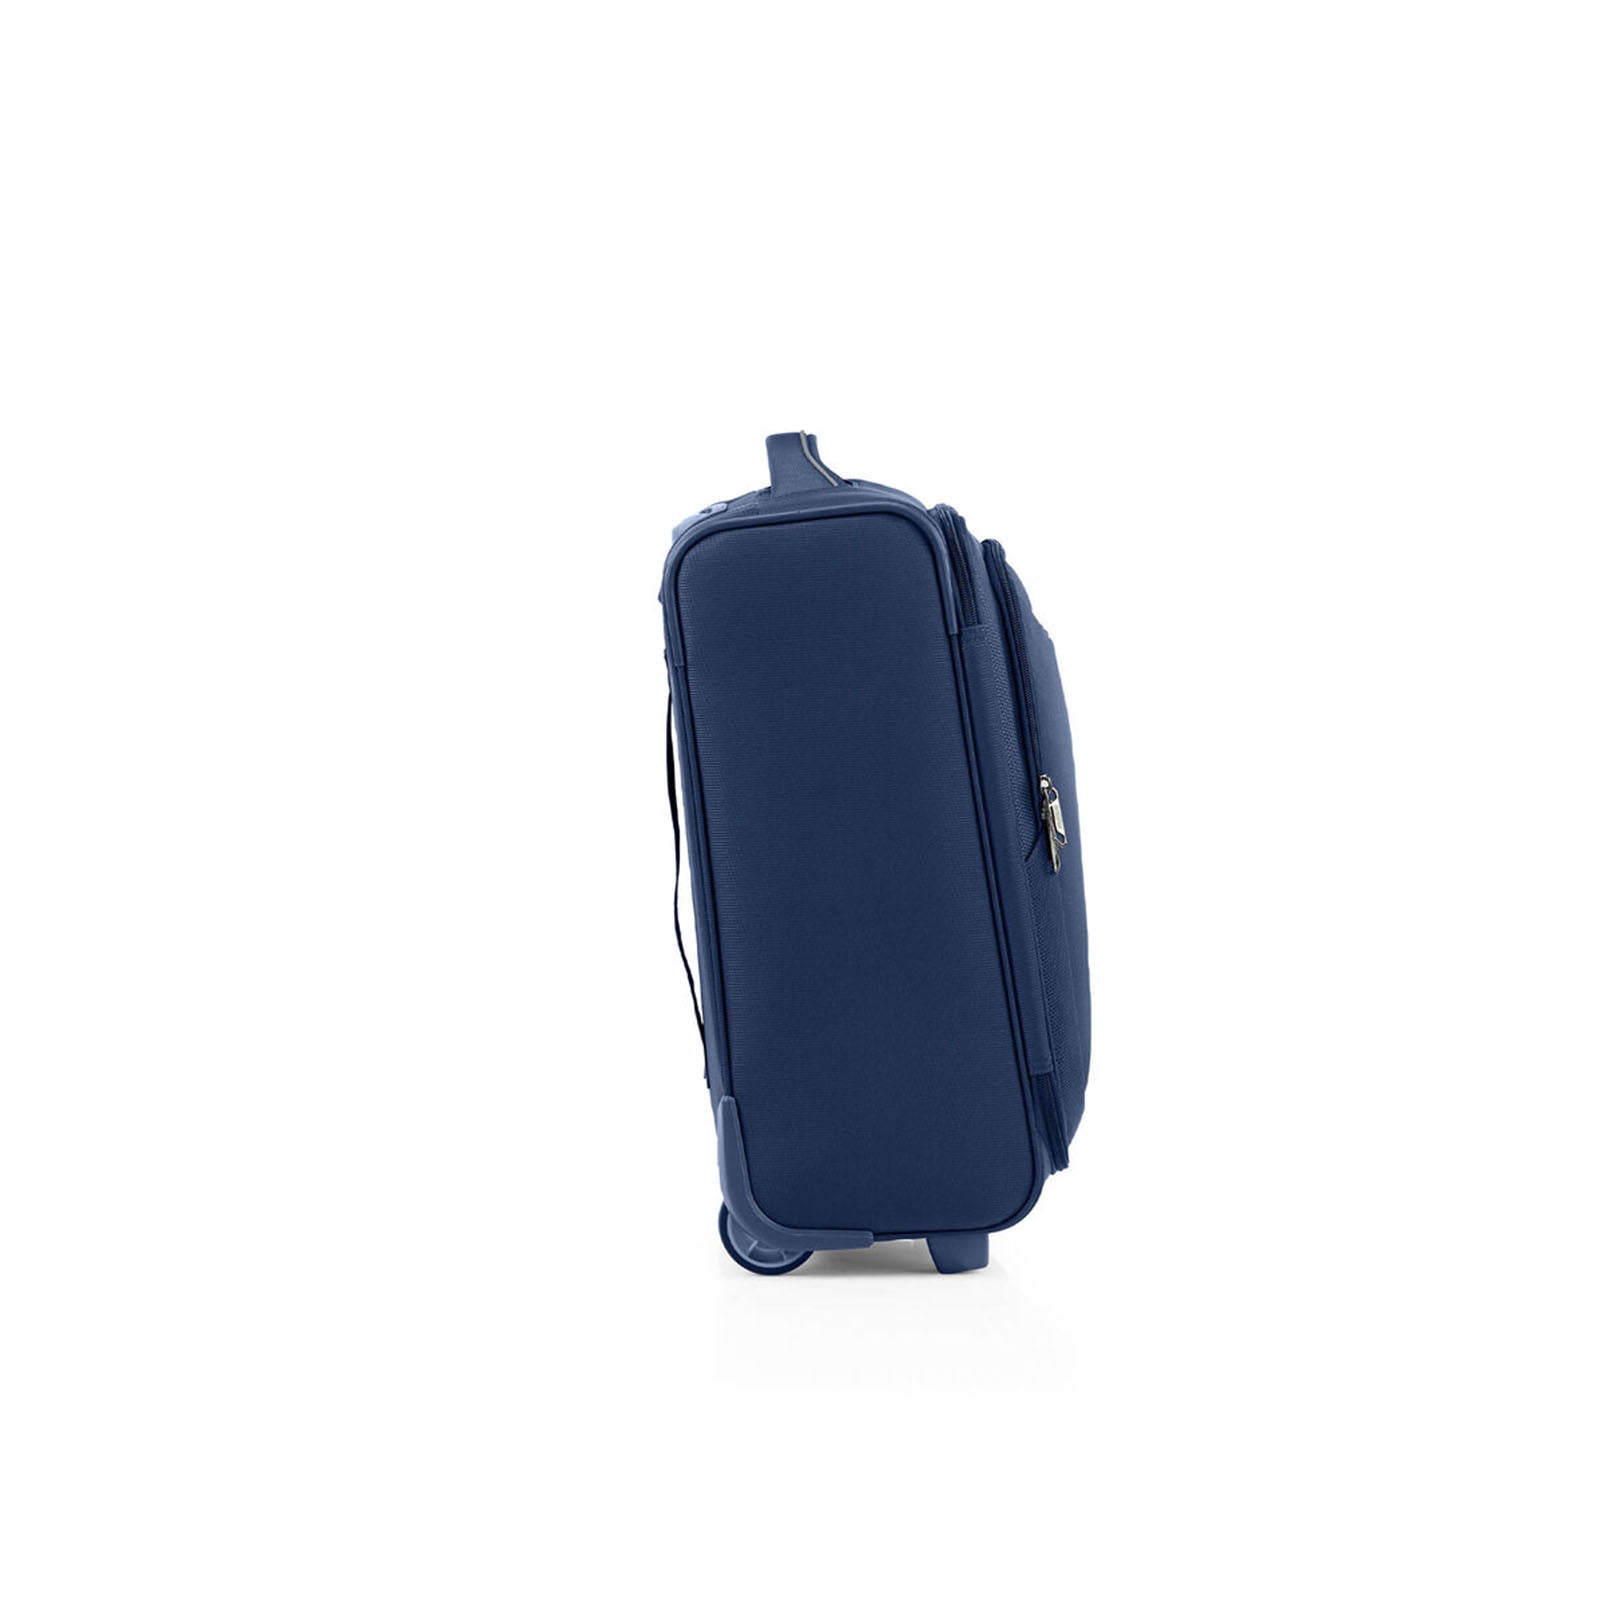 American-Tourister-Applite-4-Eco-50cm-Carry-On-Suitcase-Navy-Side